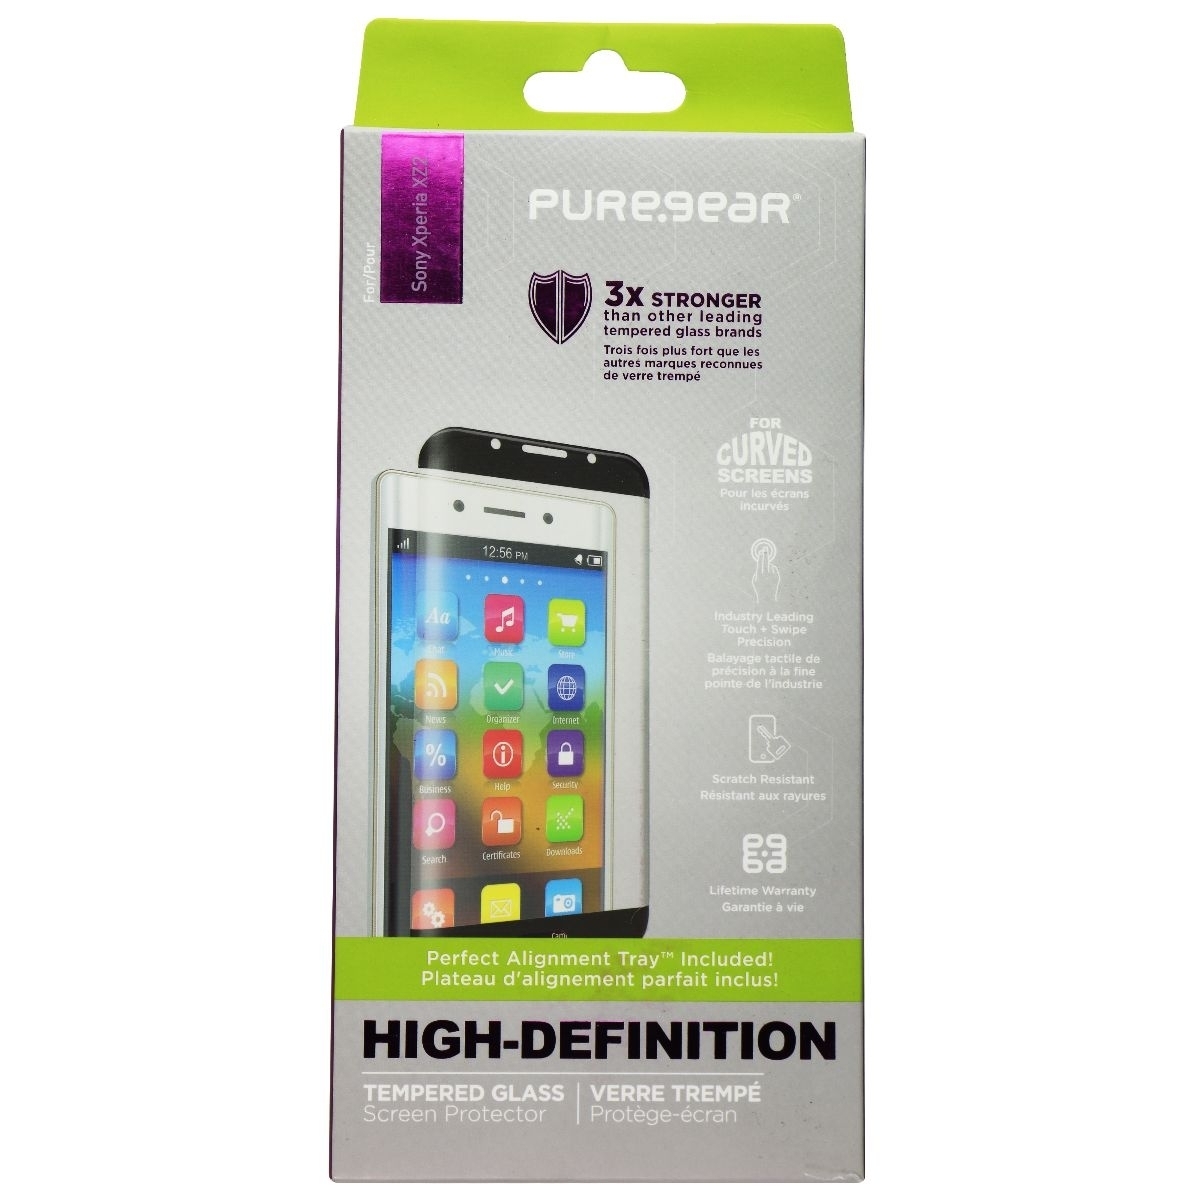 PureGear High-Definition Tempered Glass For Sony Xperia XZ2 - Clear (Refurbished)